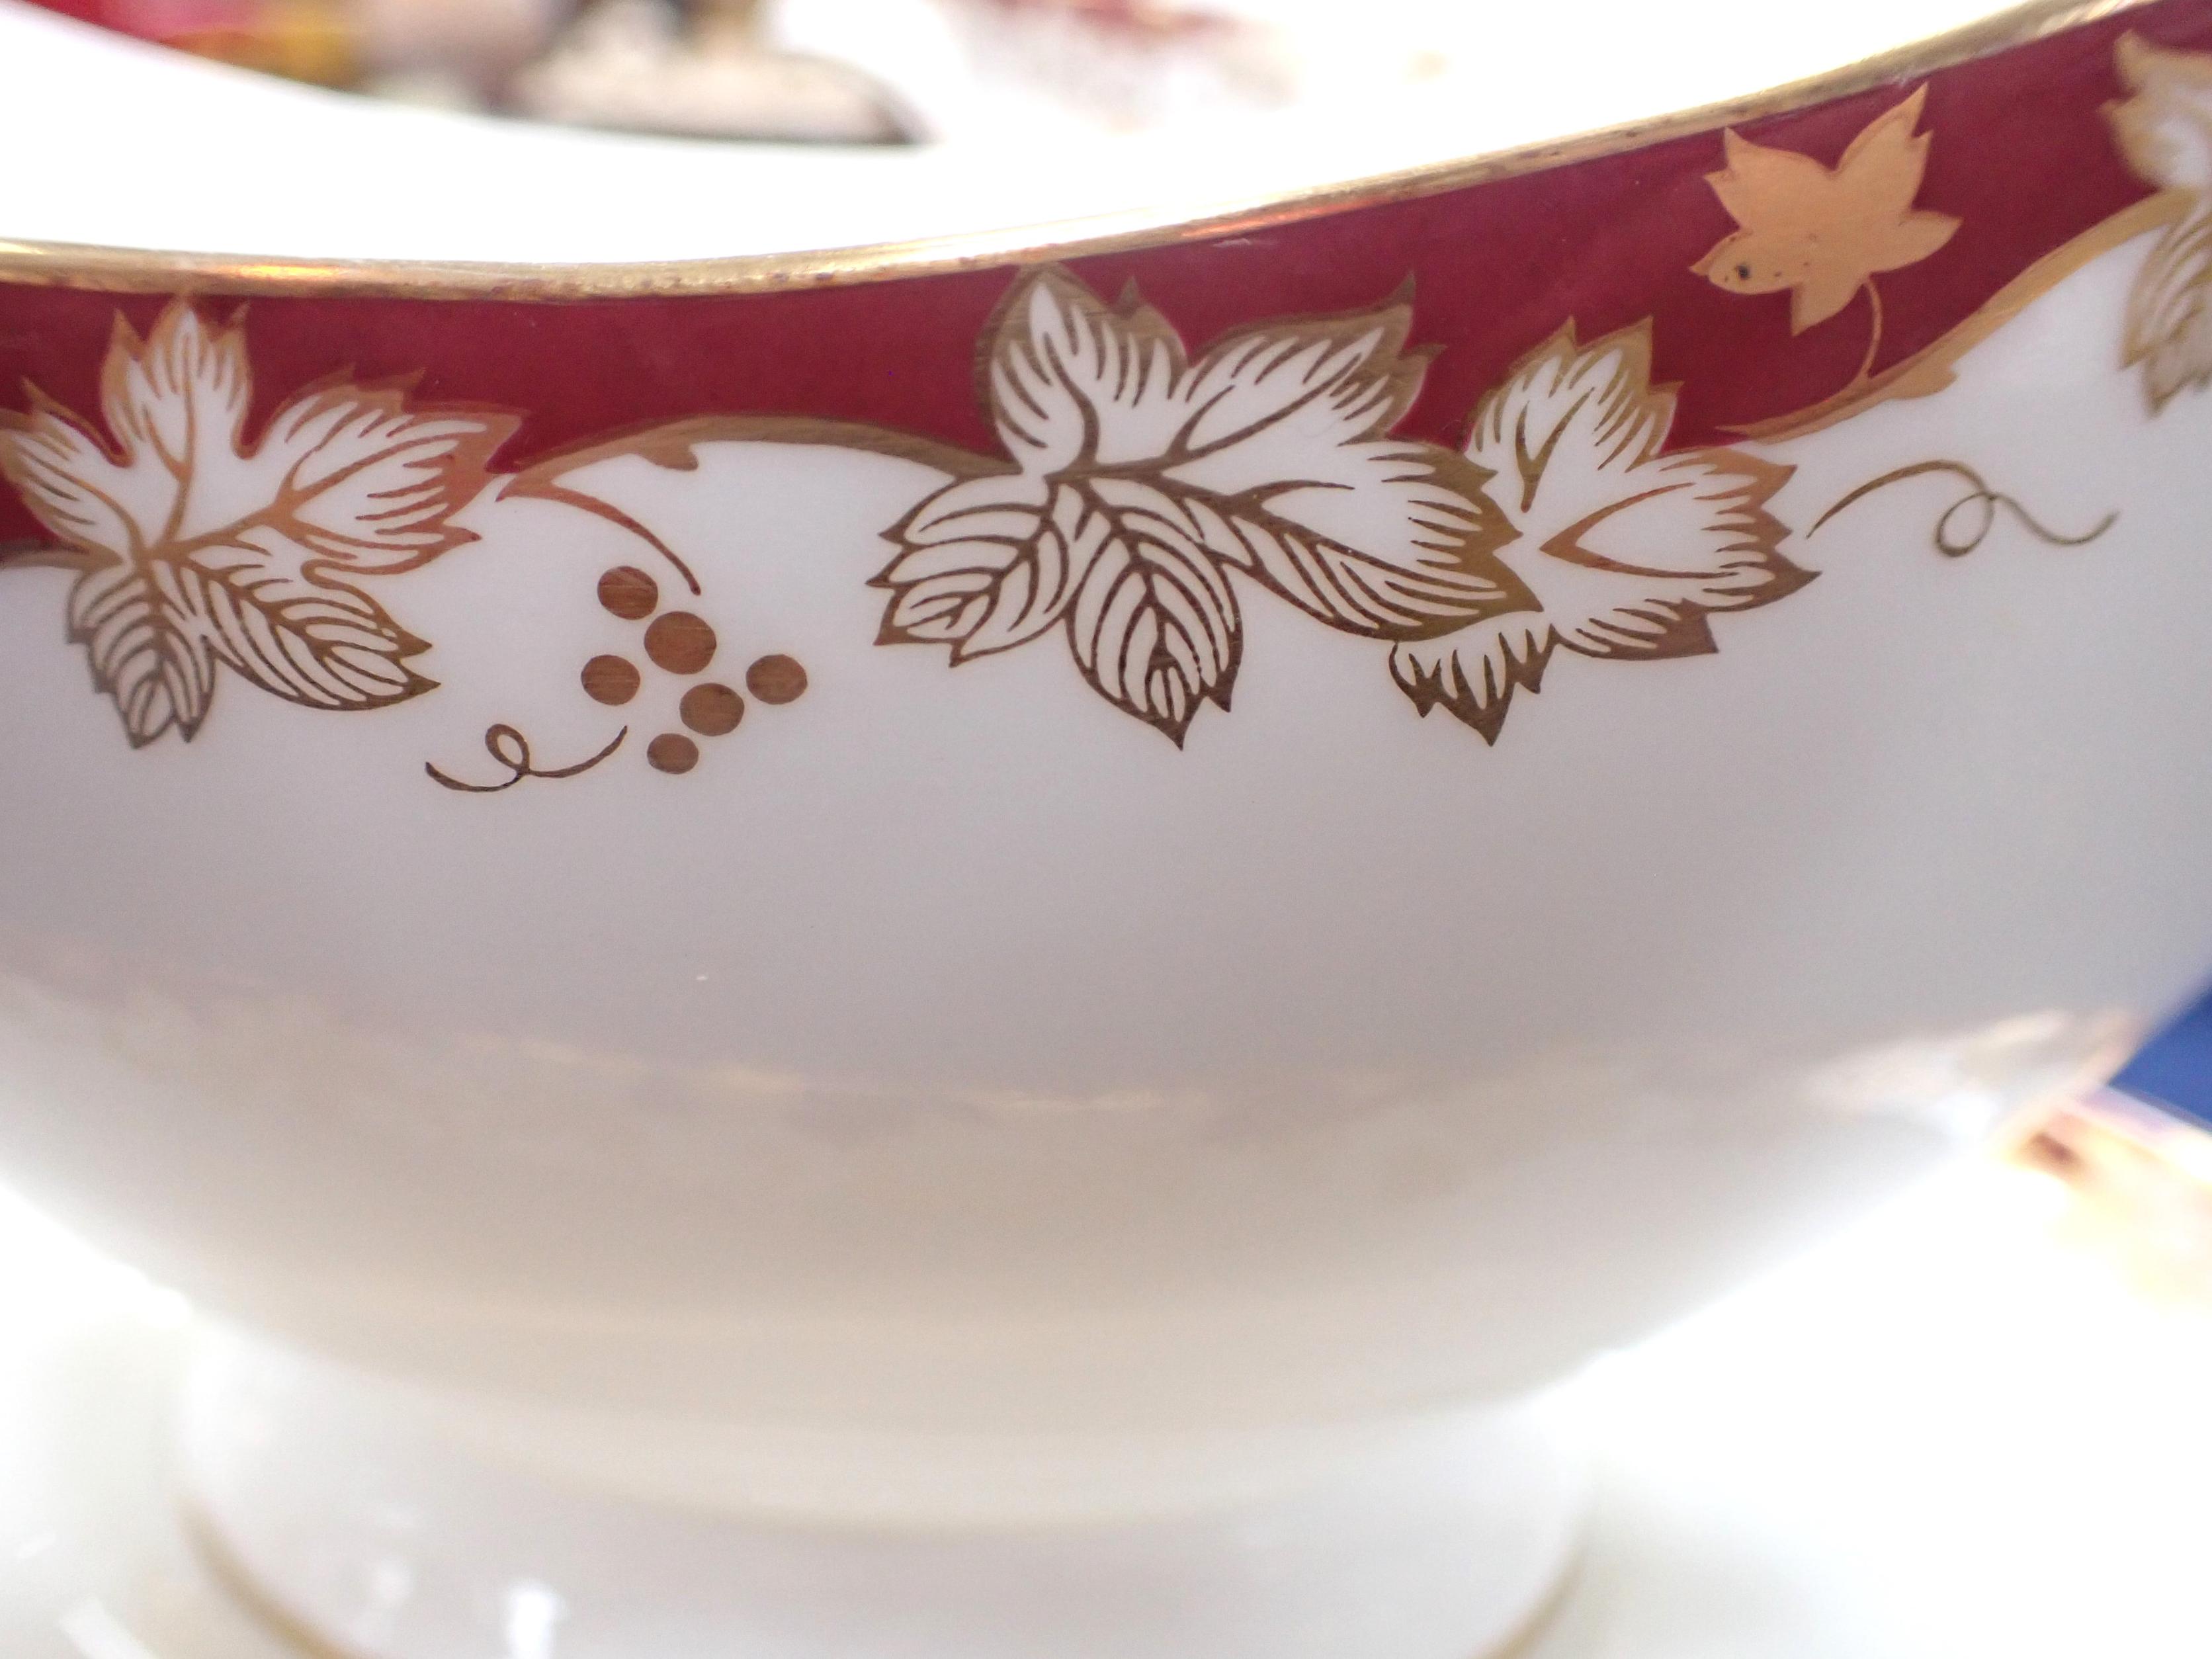 A ROYAL DOULTON 'WINTHROP' PART DINNER SERVICE - Image 3 of 4